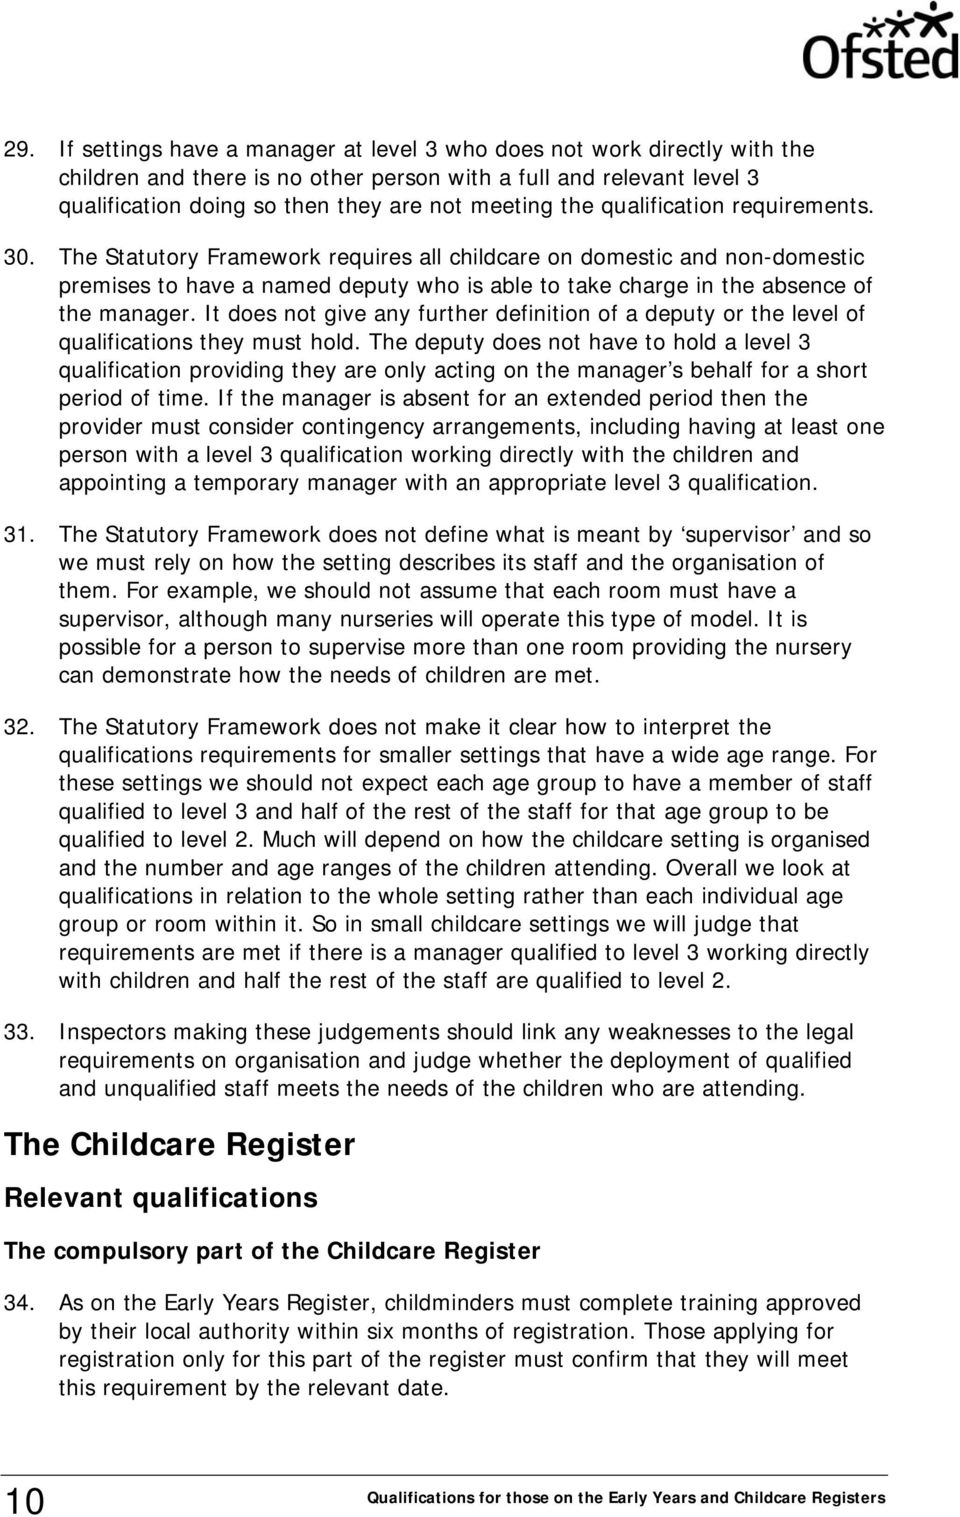 The Statutory Framework requires all childcare on domestic and non-domestic premises to have a named deputy who is able to take charge in the absence of the manager.